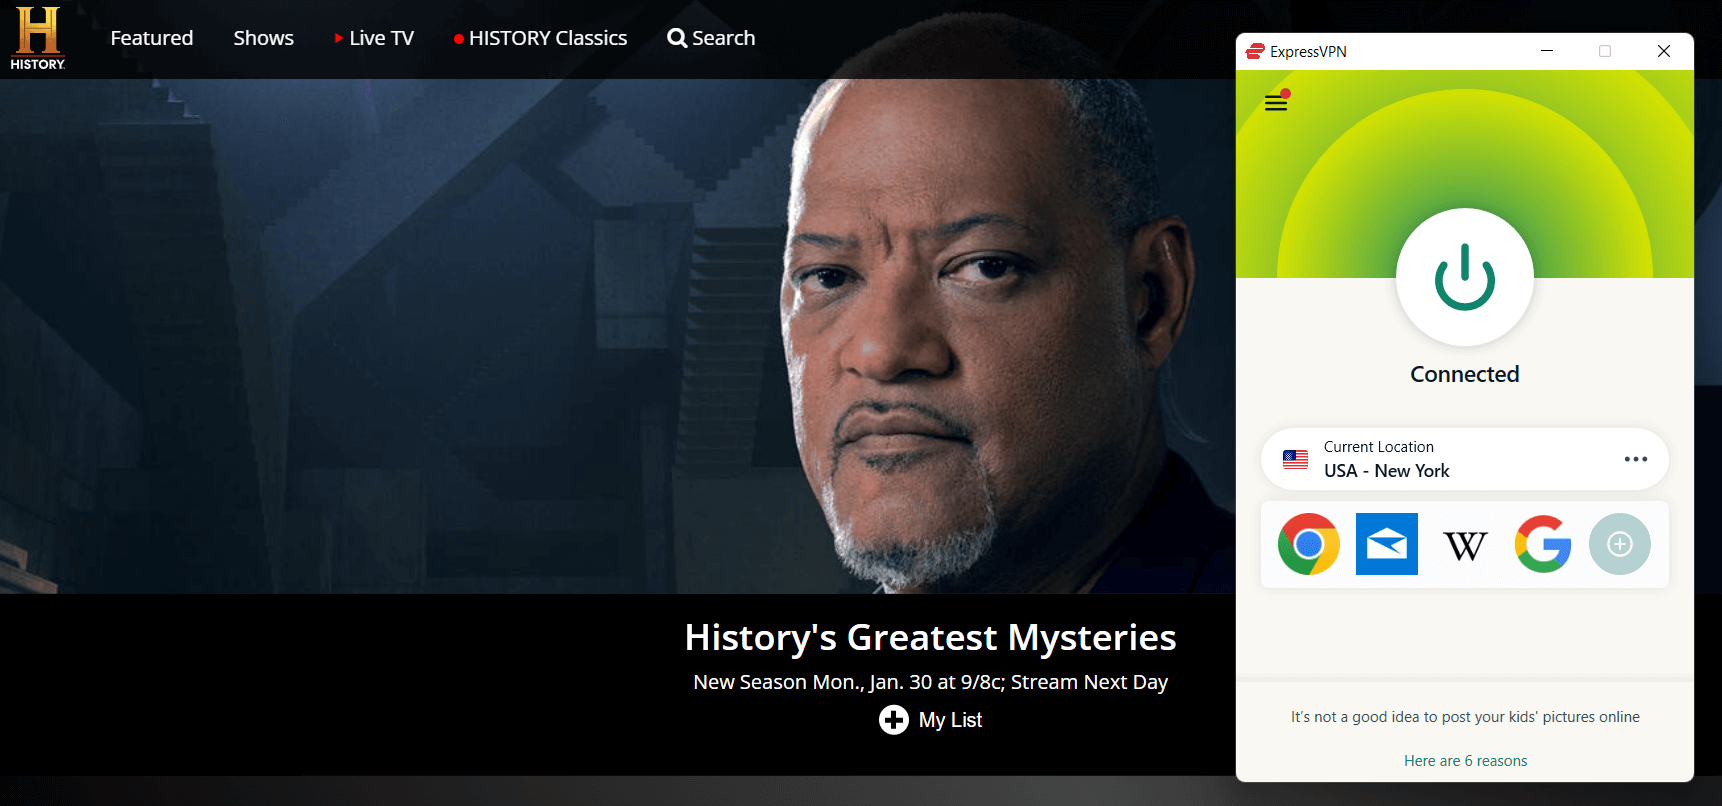 watch-historys-greatest-mysteries-on-discovery-plus-through-history-channel-in-new-zealand-using-expressvpn